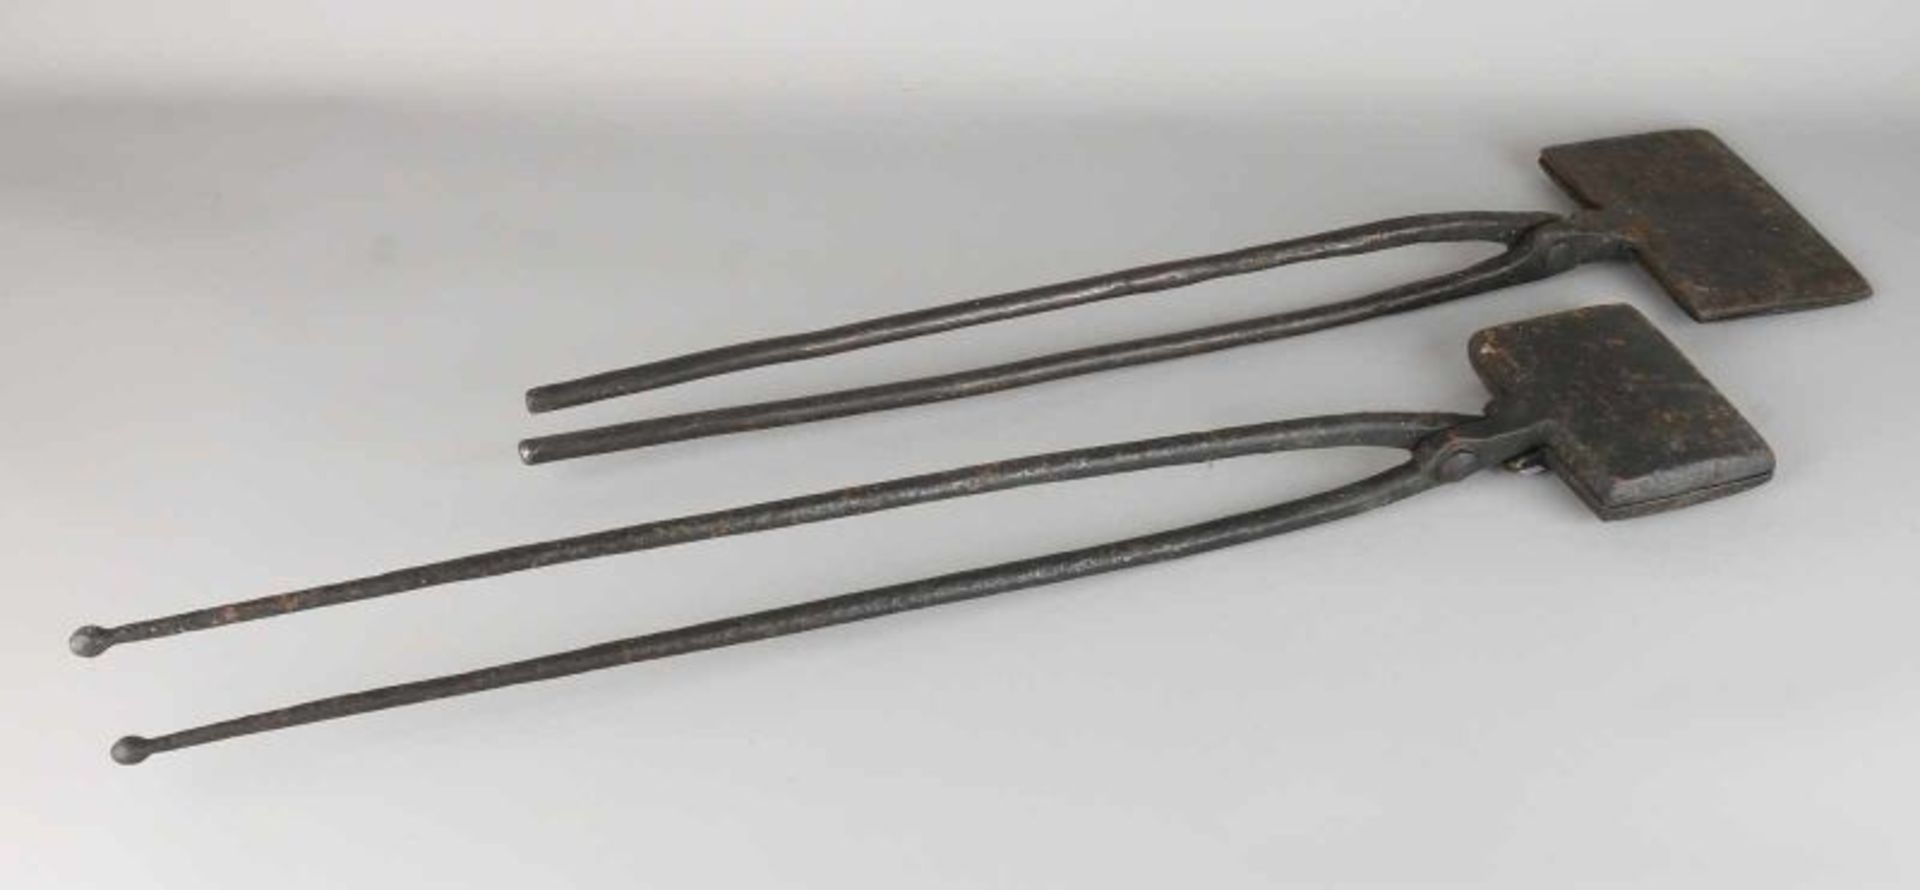 Two 19th-century wrought-iron waffle irons. Size: 70-76 cm. In good condition.